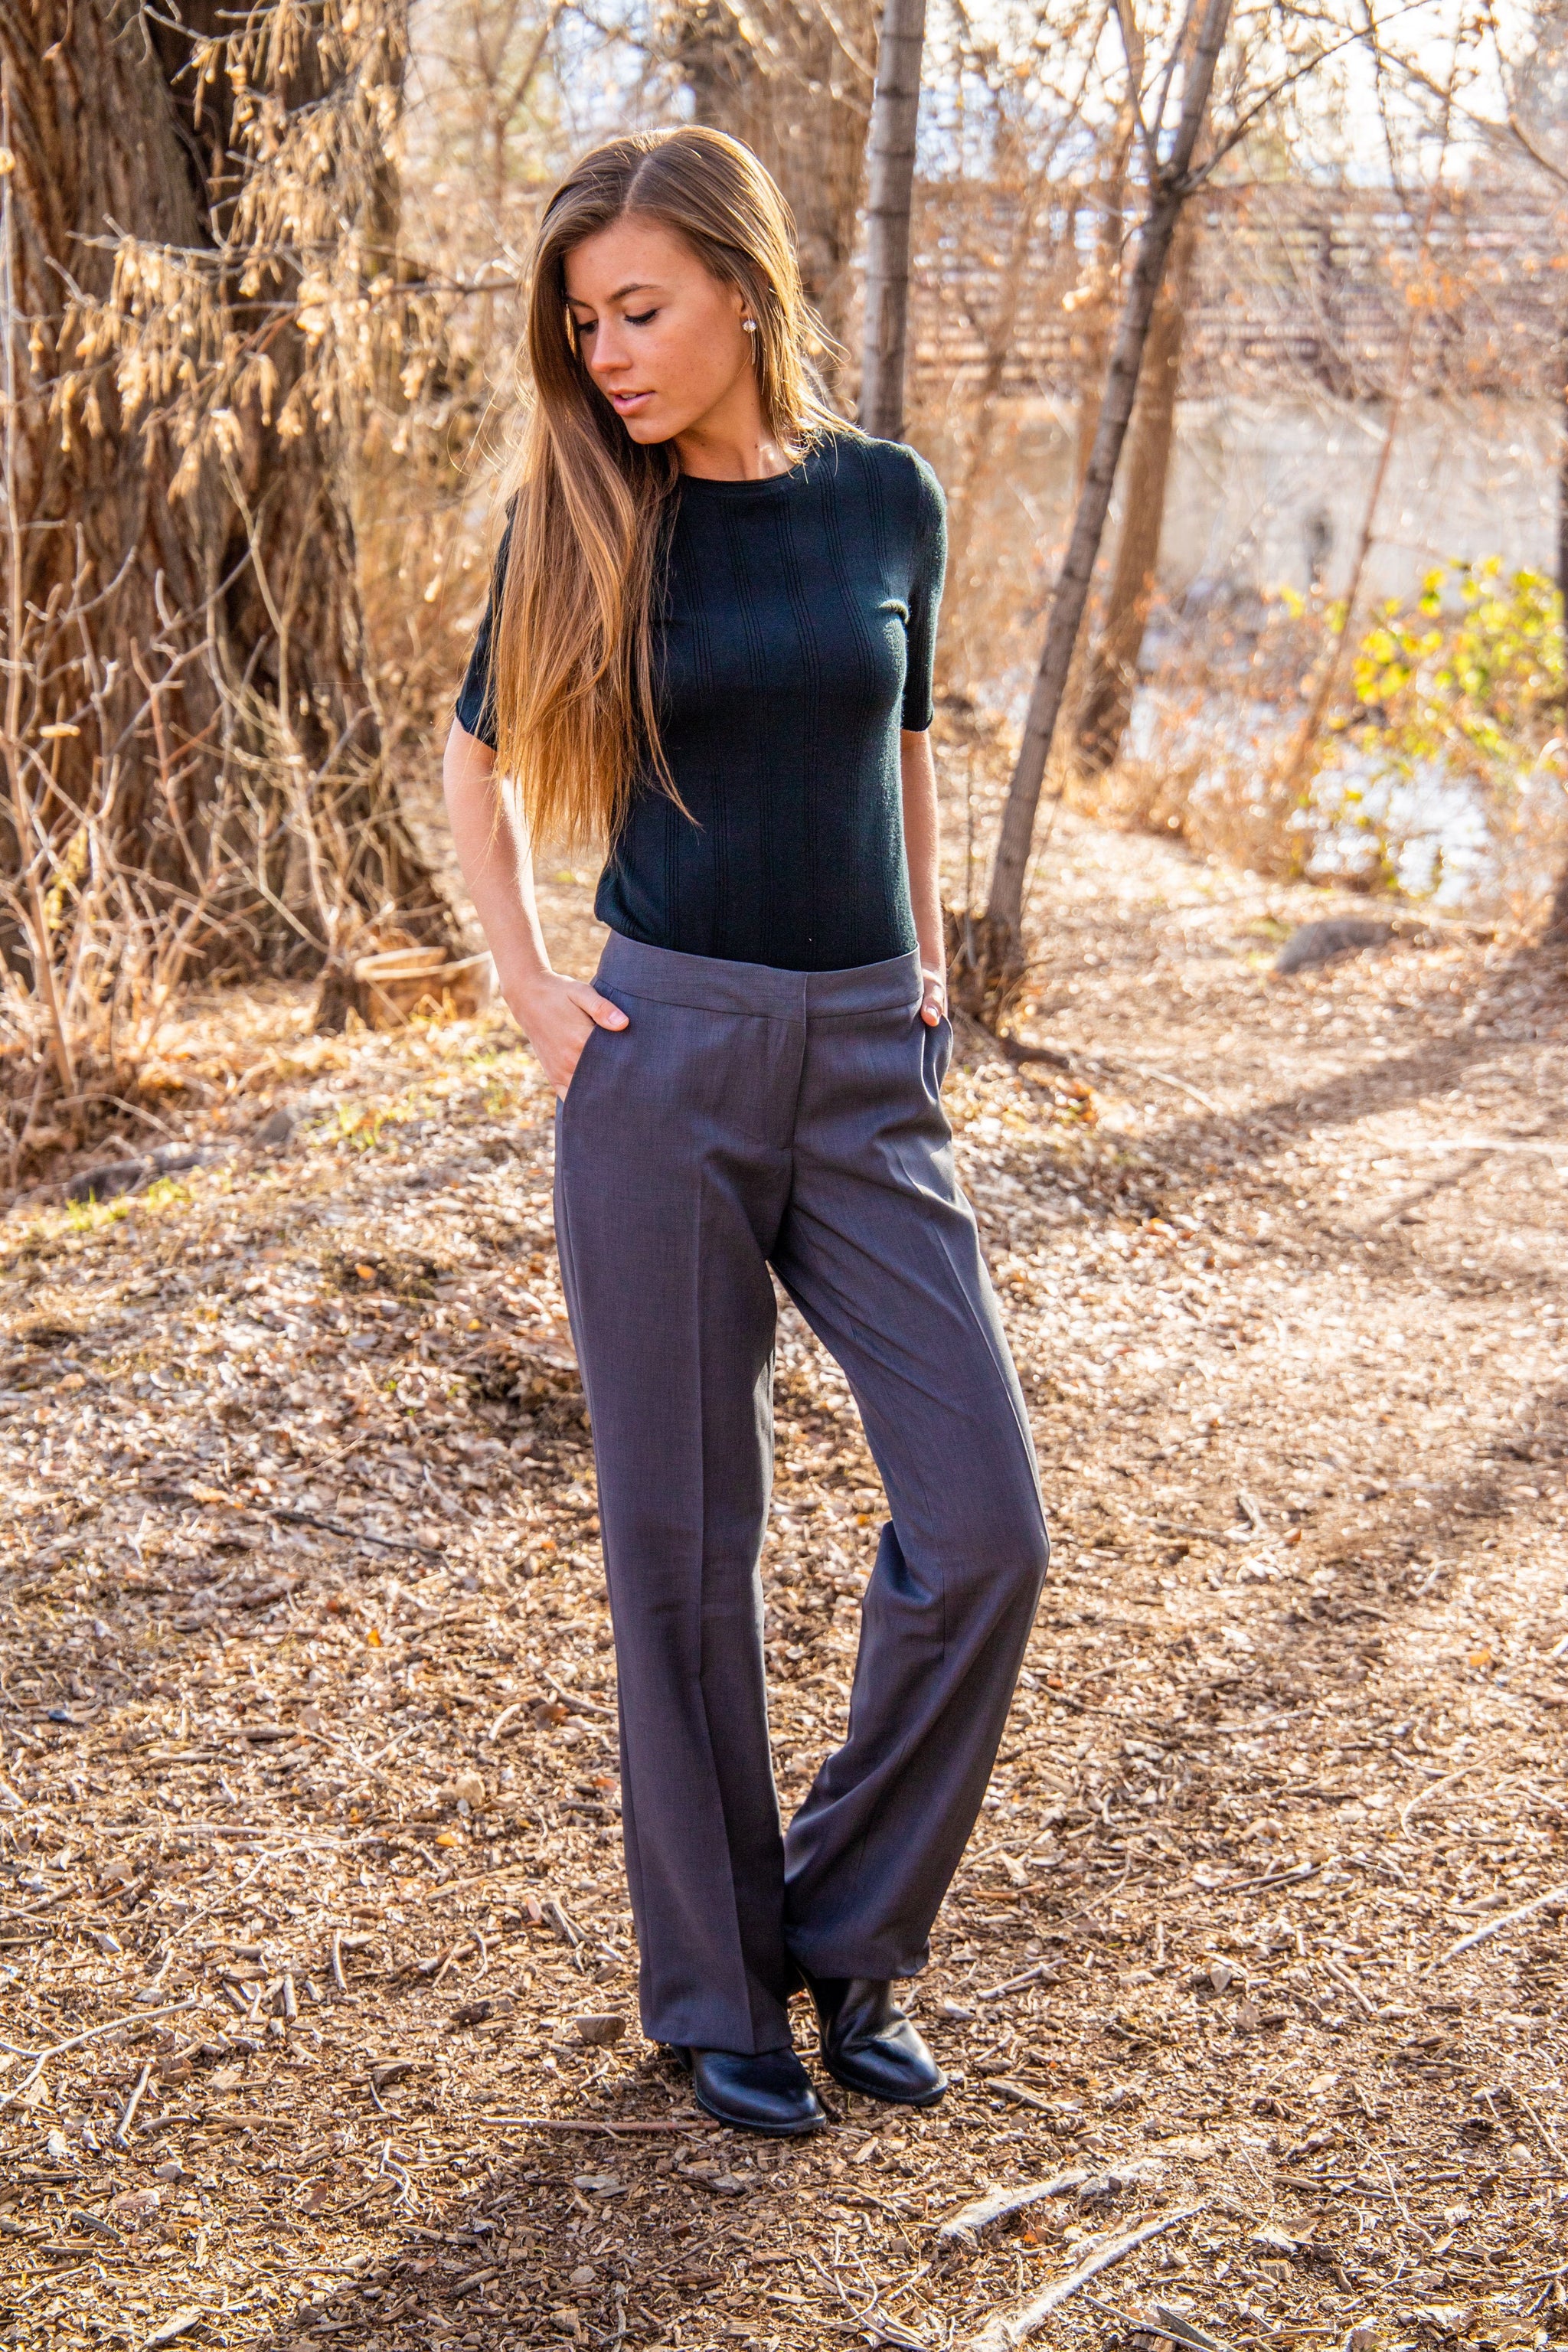 Work Style: Betabrand Yoga Dress Pants and Wrap Around Sweater